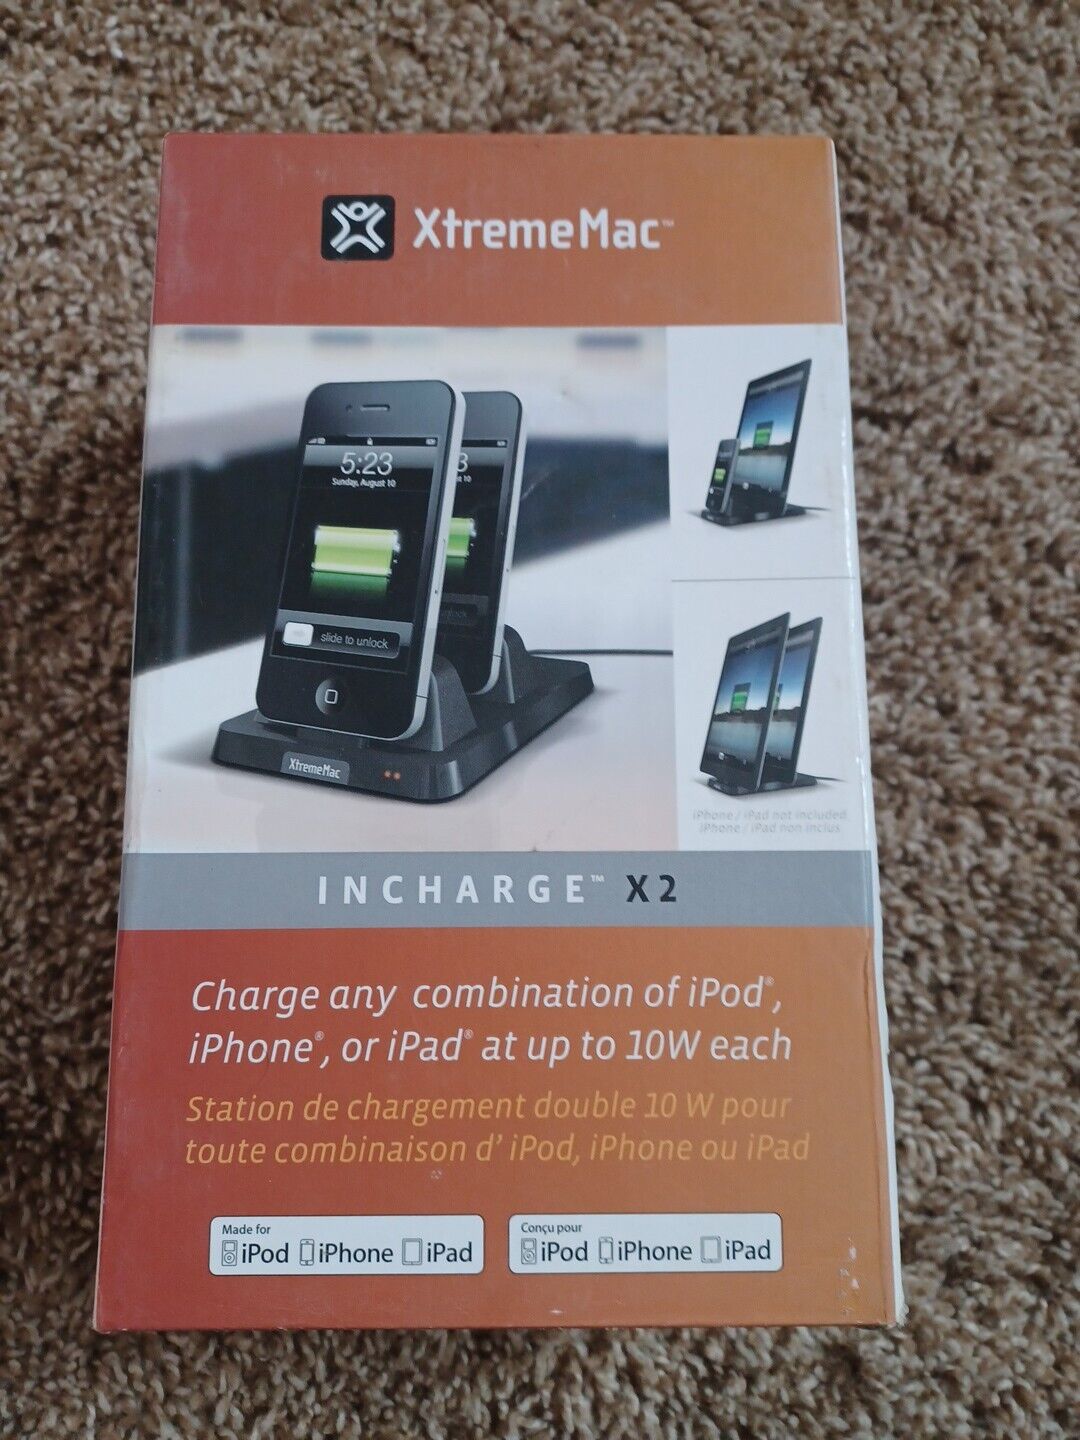 XtremeMac Incharge x2 Duo Charger for iPhone/iPod/iPad - 10w Dual Changing Dock